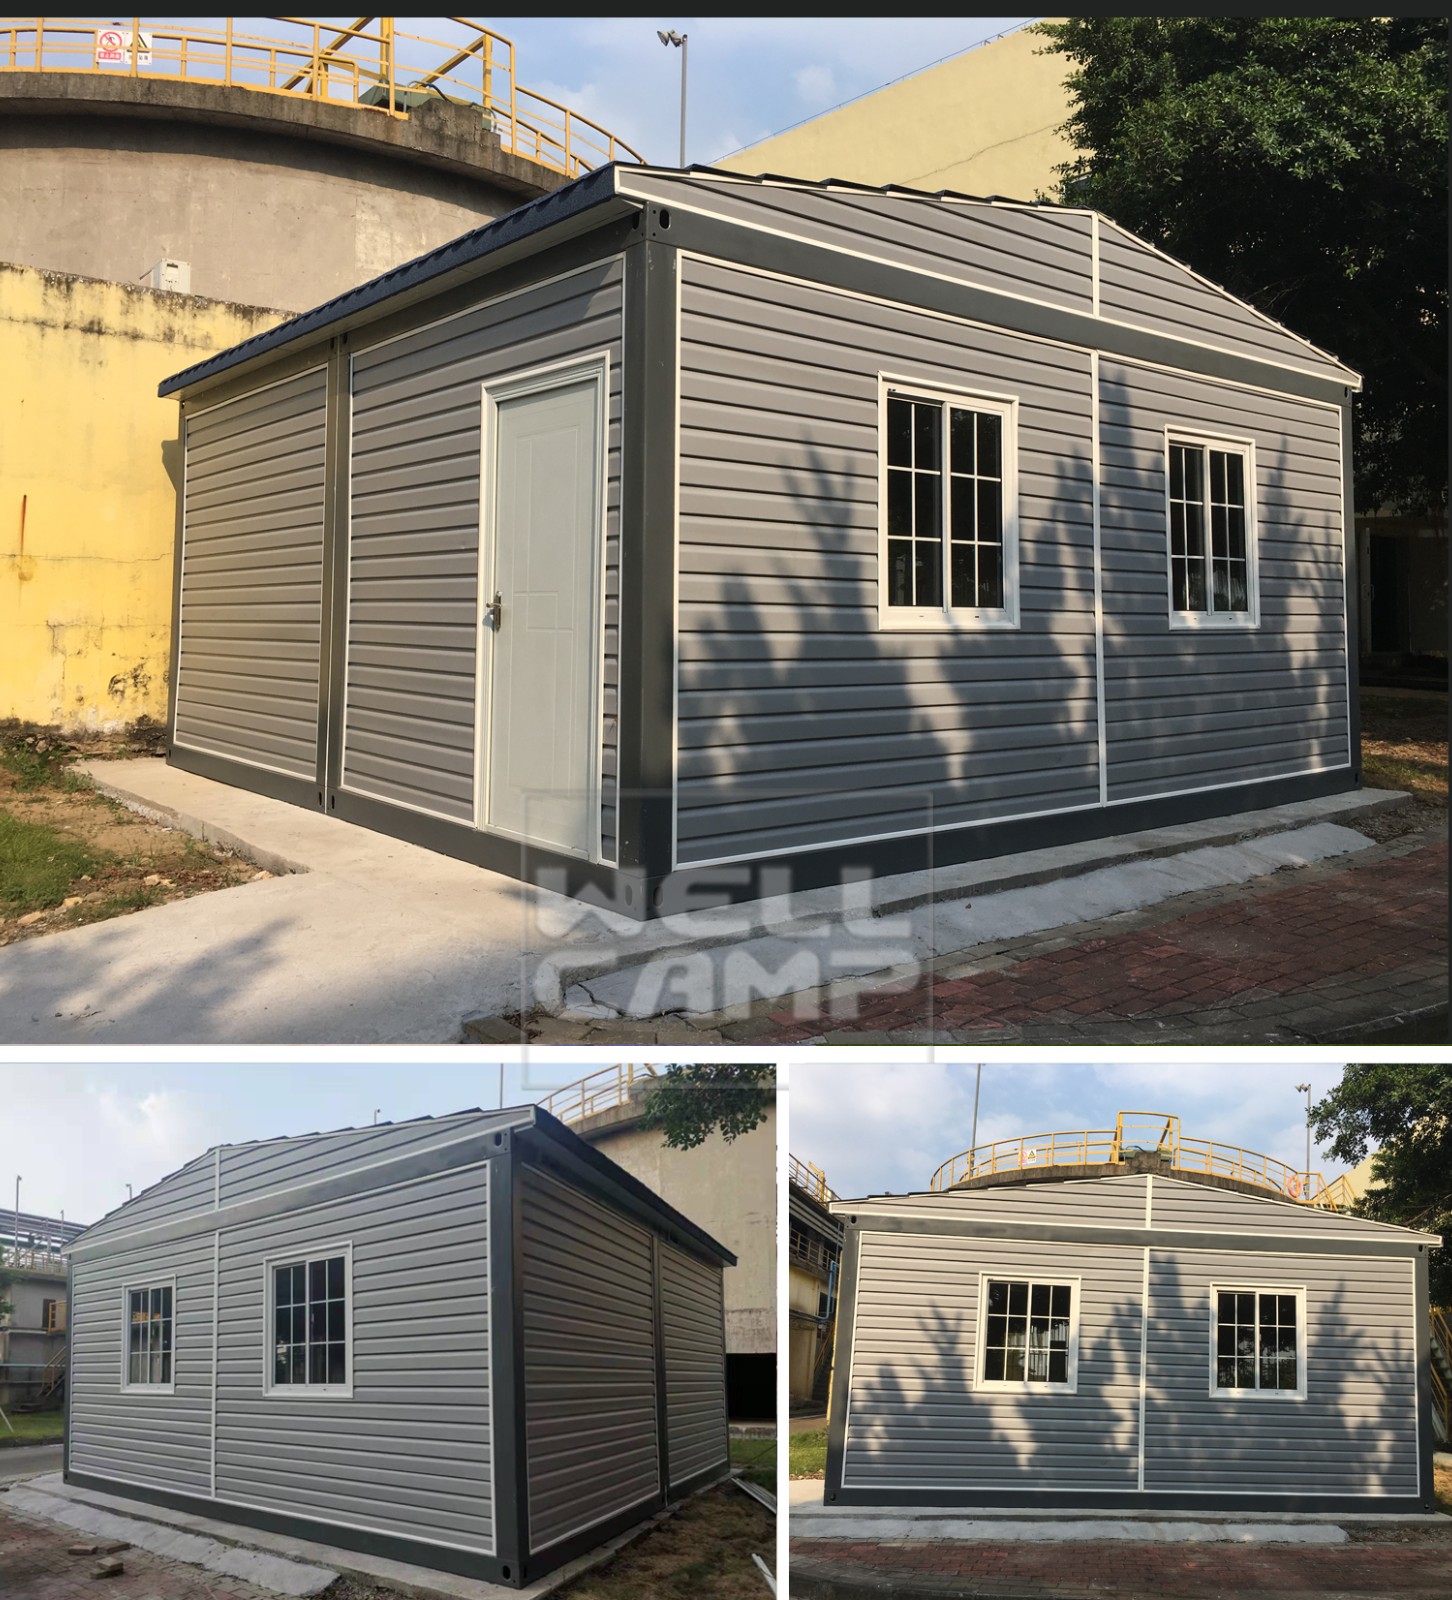 product-WELLCAMP, WELLCAMP prefab house, WELLCAMP container house-img